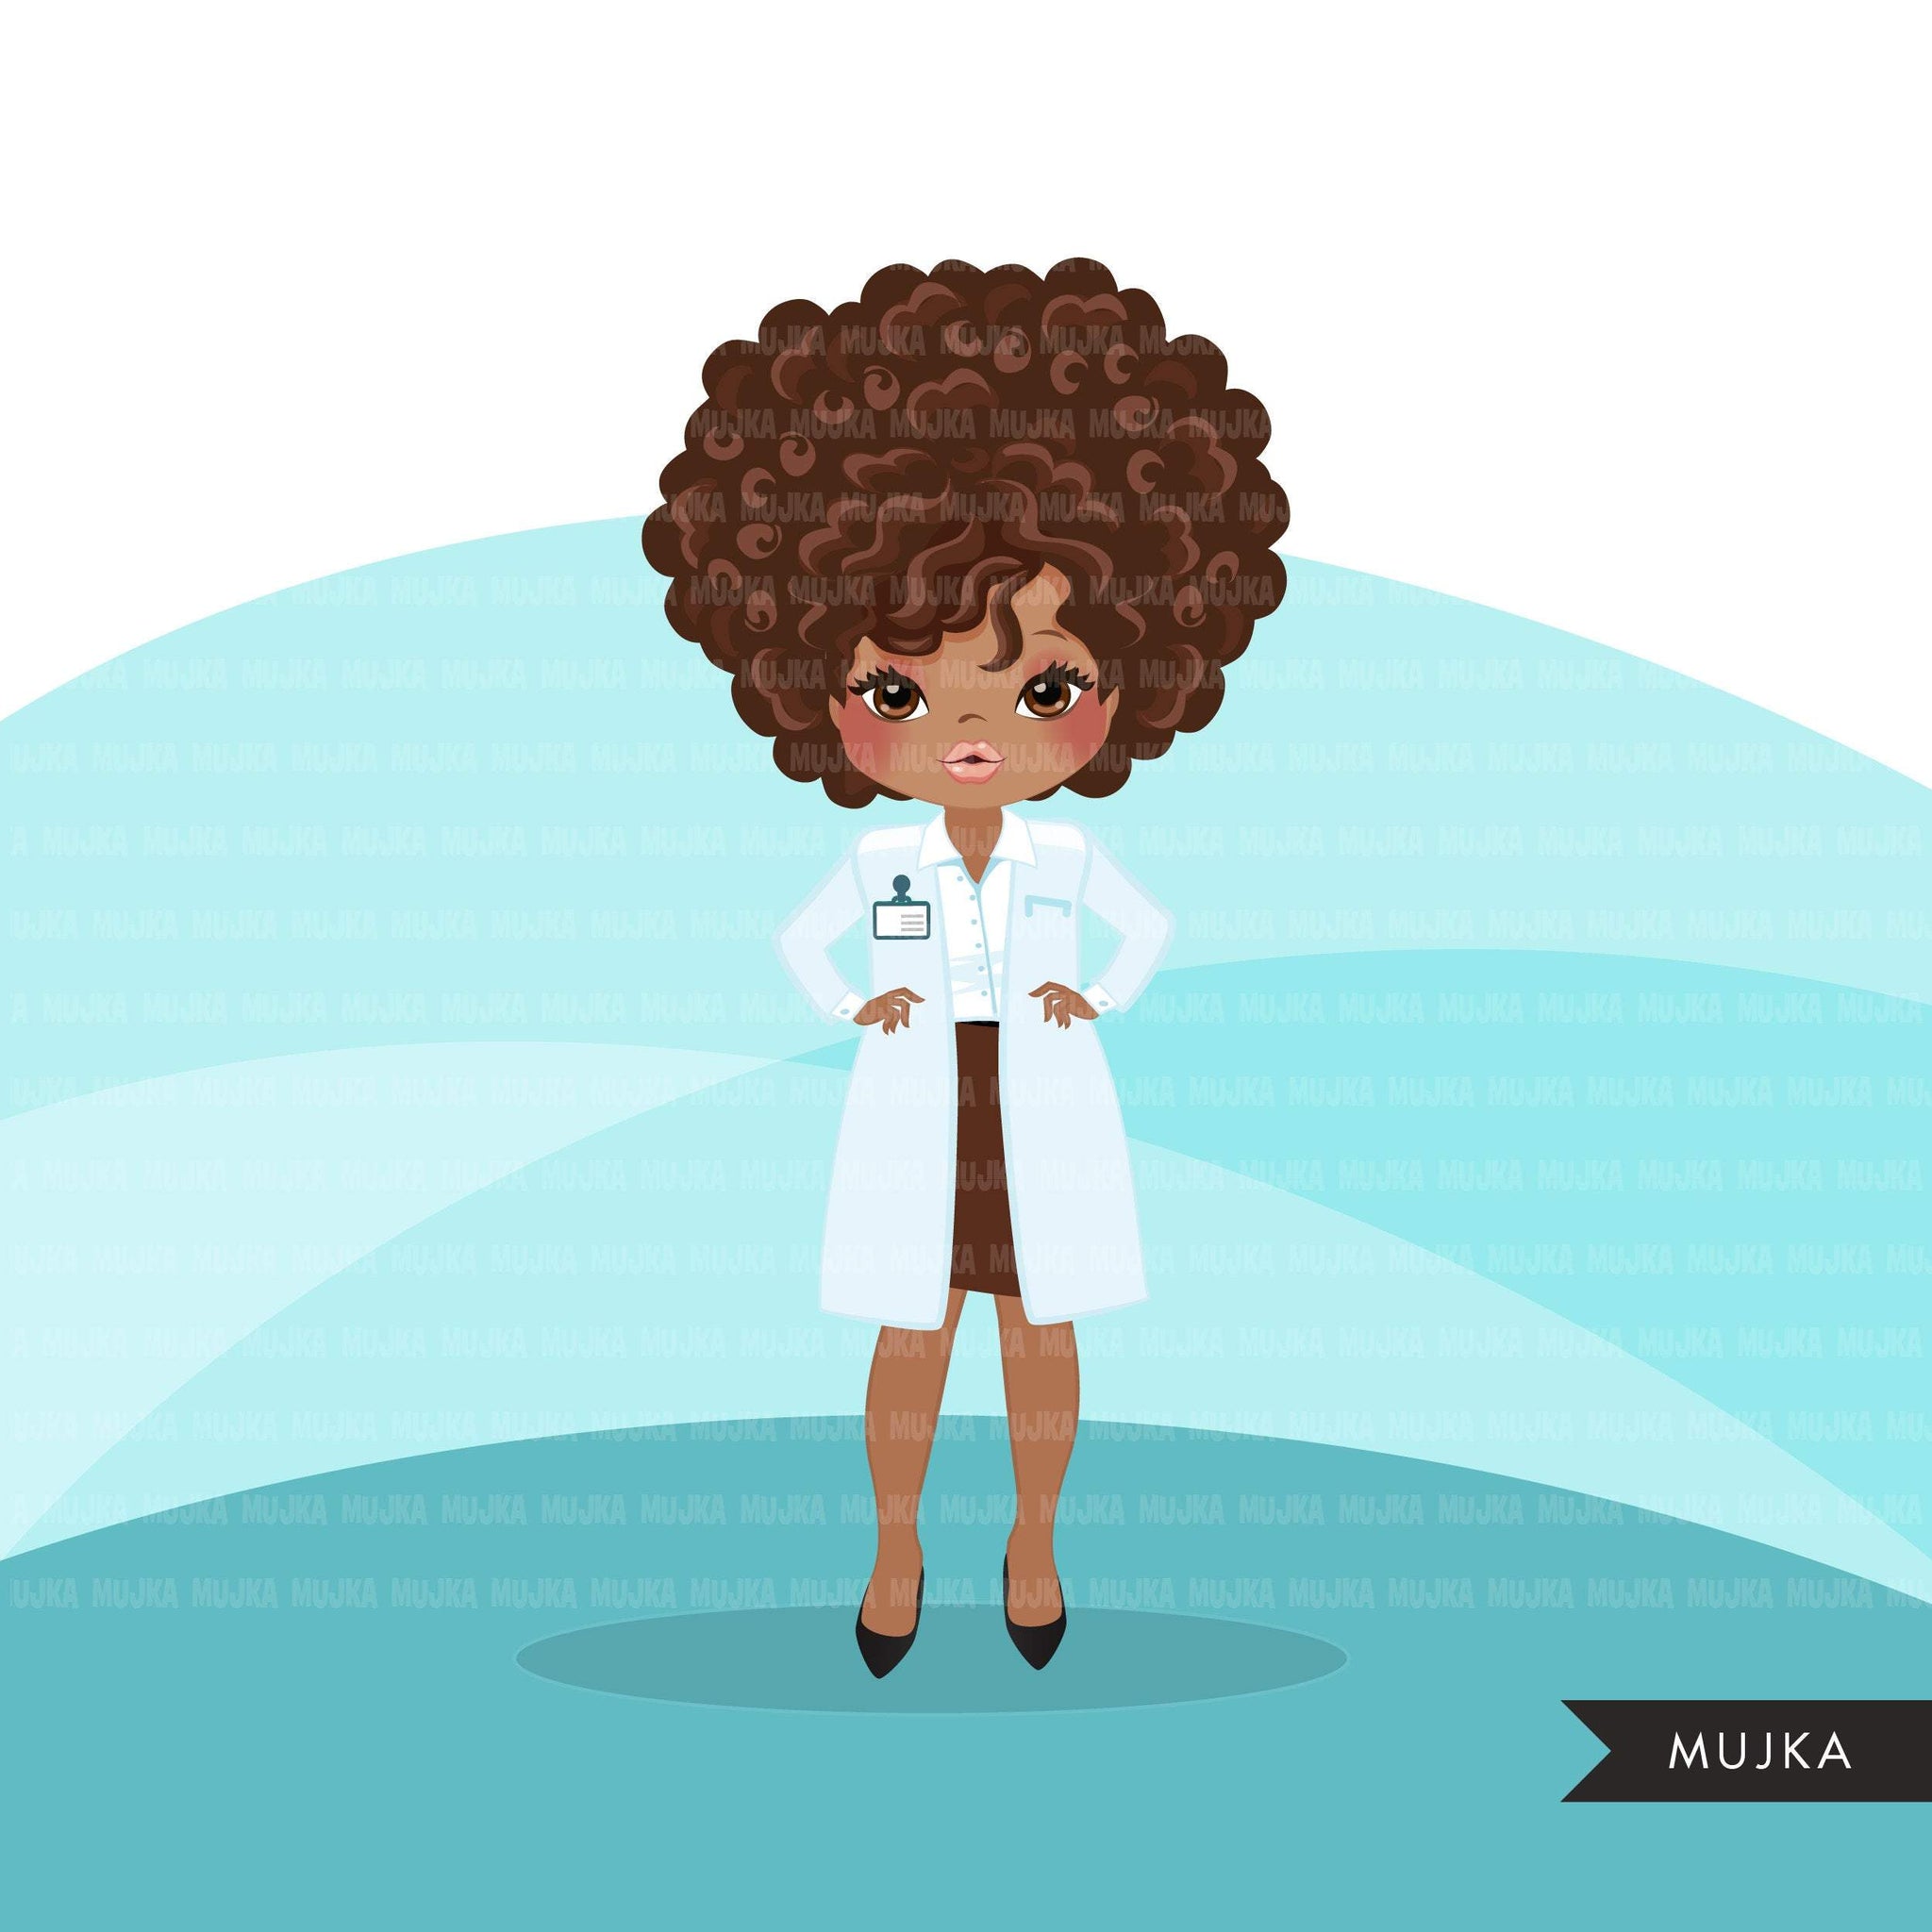 woman doctor clipart